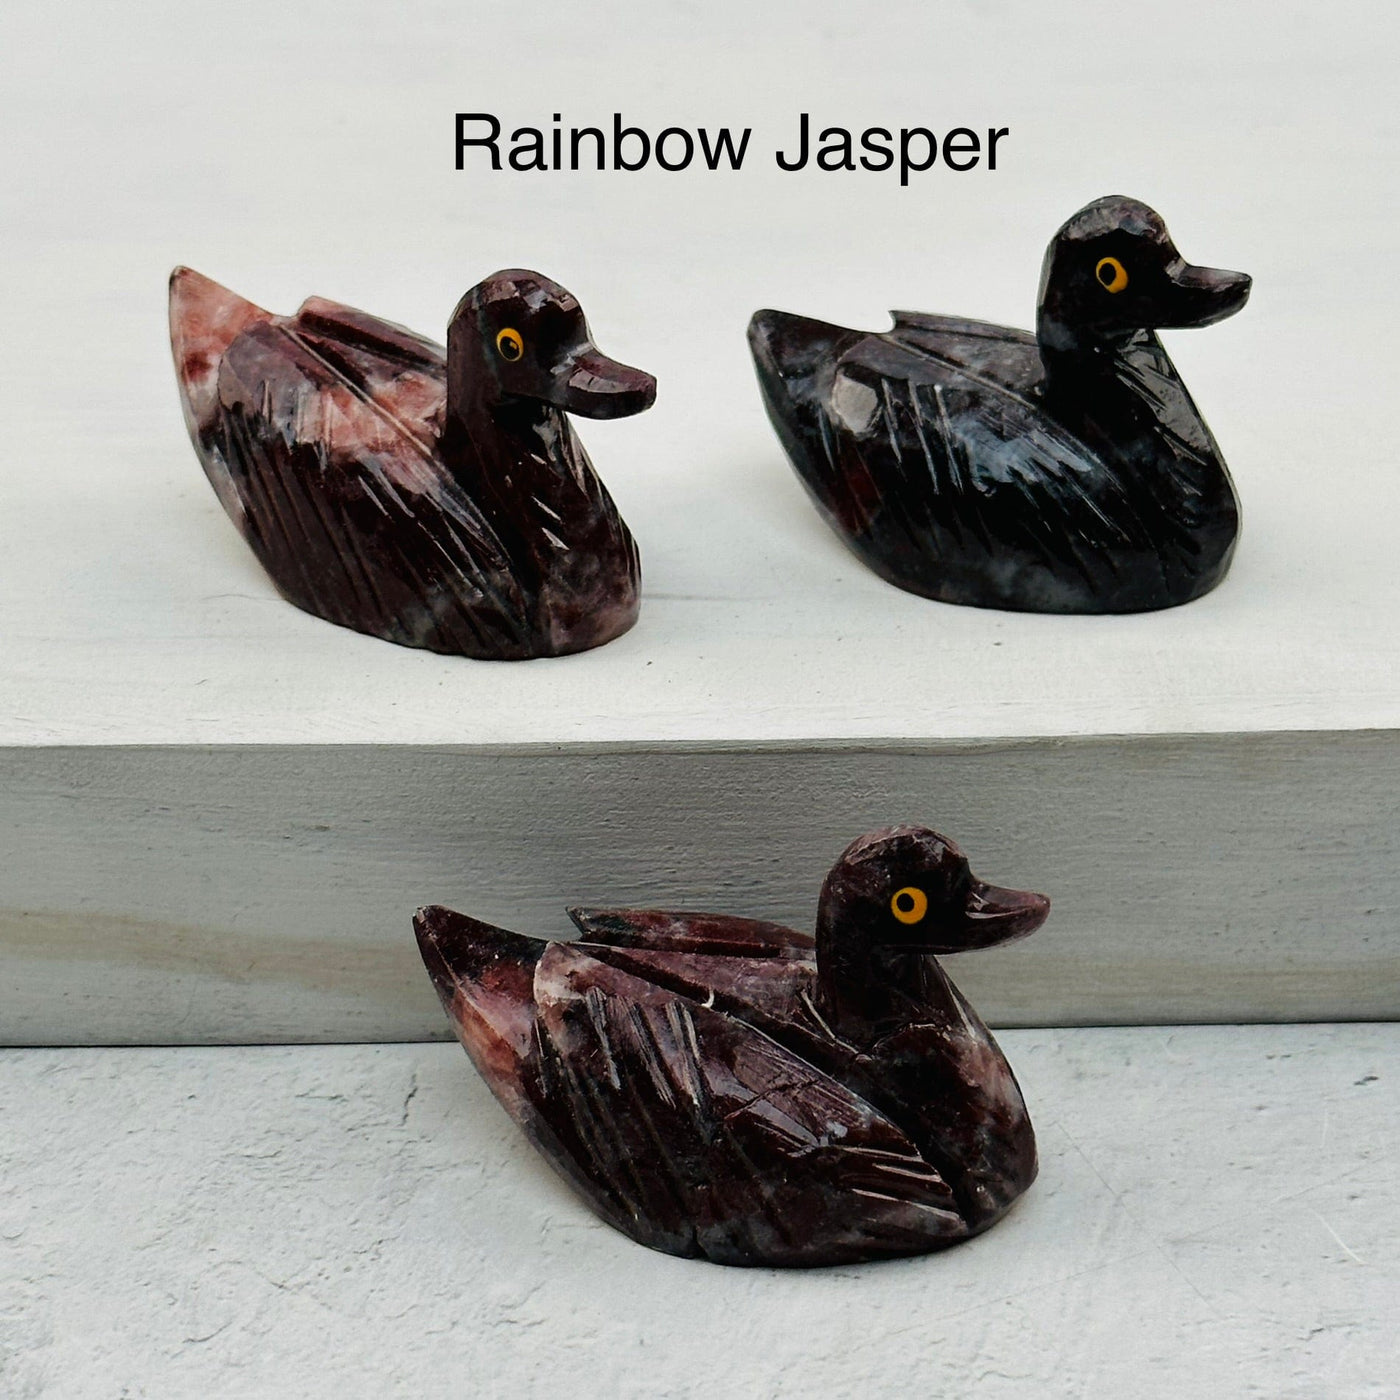 Carved Crystal Duck available in rainbow jasper